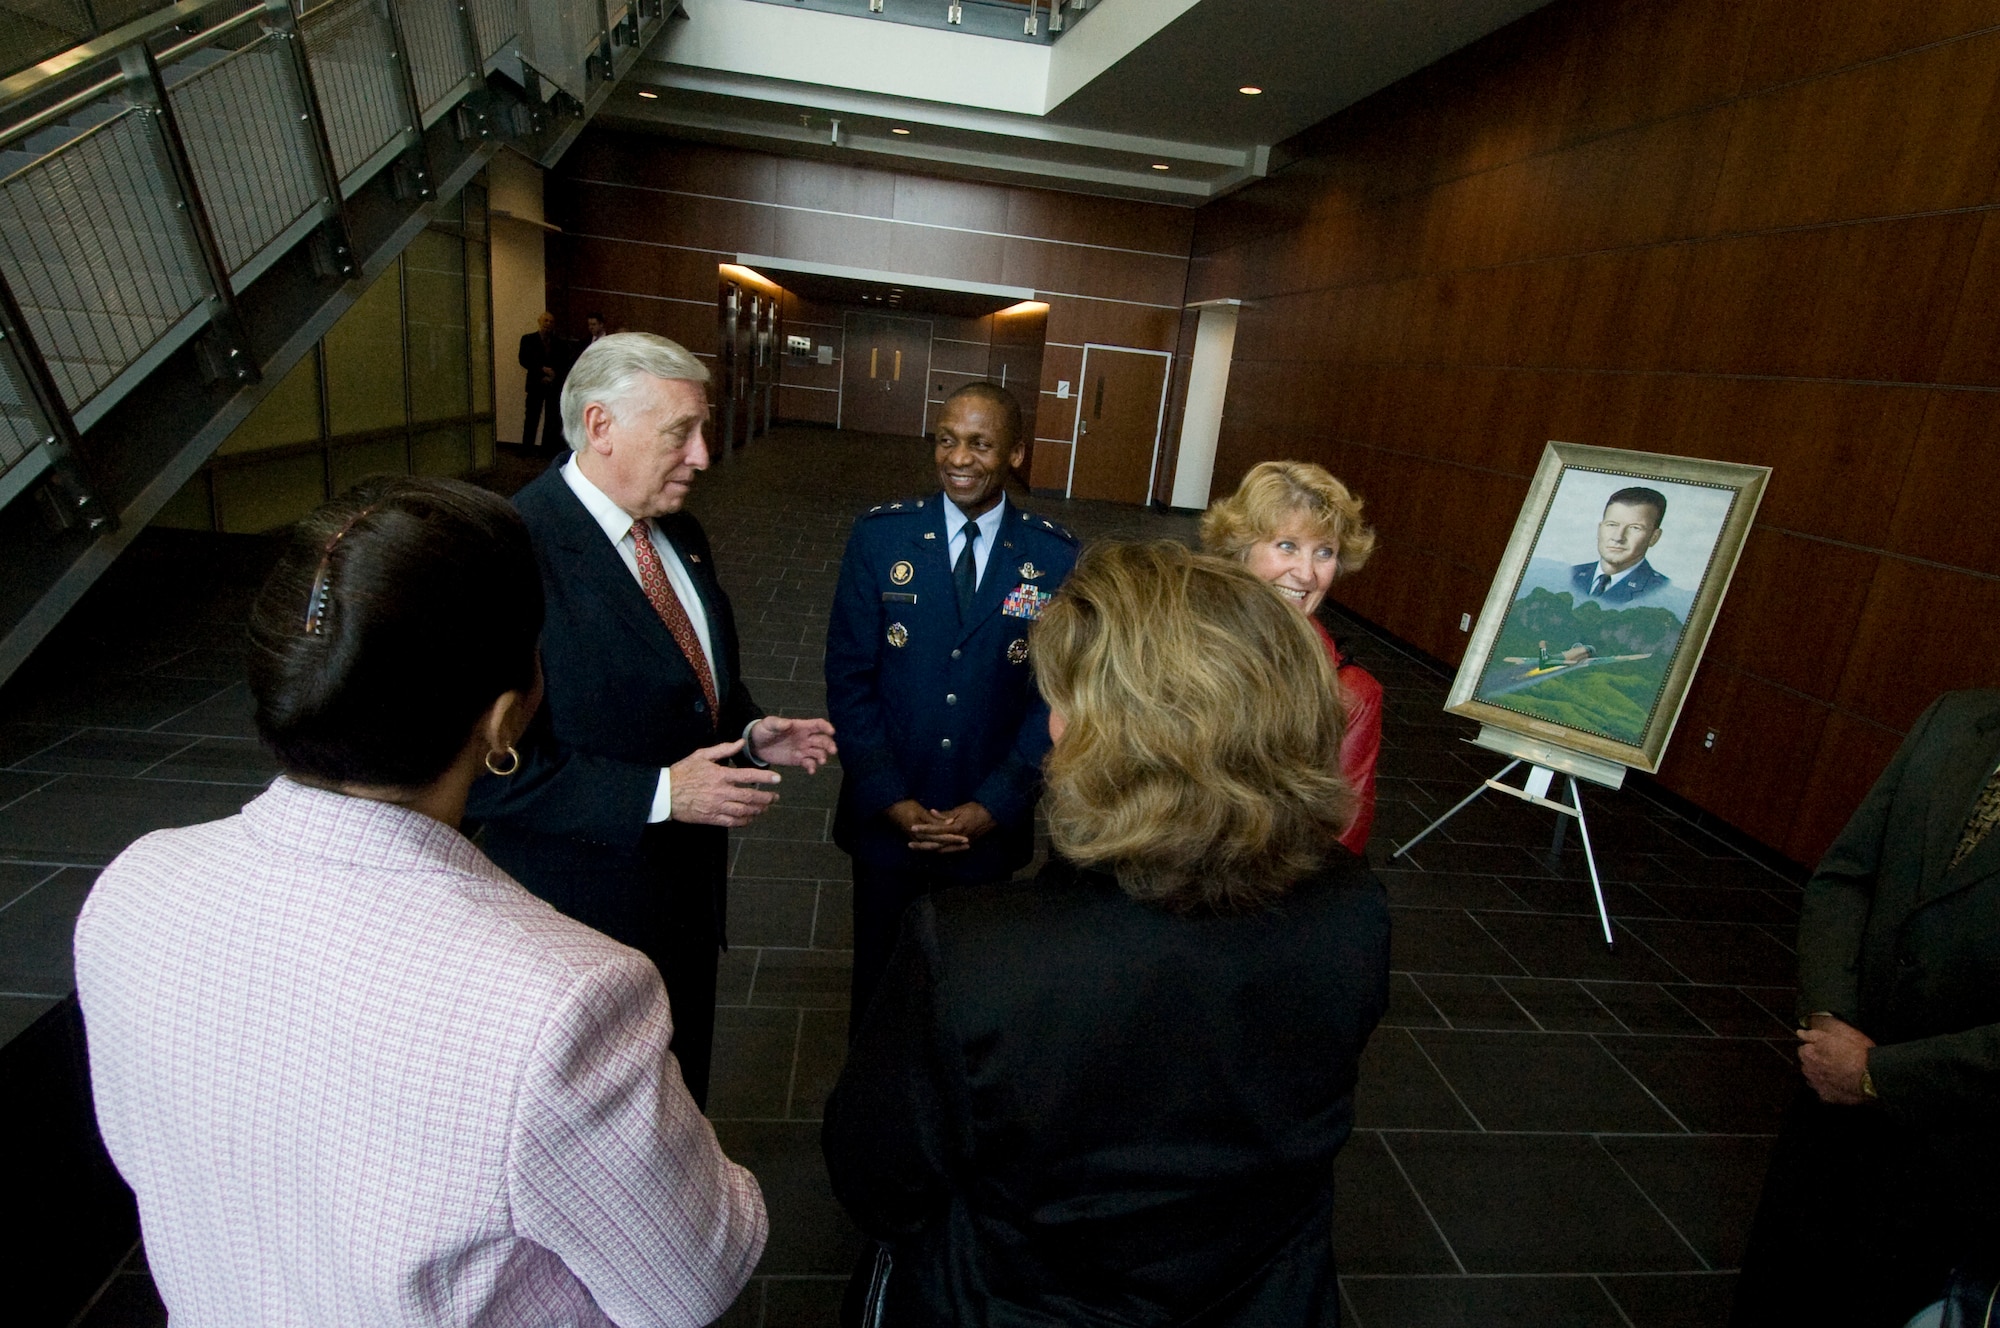 Rep. Steny Hoyer (D-Md.) talks with Maj. Gen. Darren McDew, Air Force District of Washington commander, inside the lobby of the newly dedicated William A. Jones III building during a tour of the facility March 22, 2011. Located atop 17 acres on Joint Base Andrews, the state-of-the-art facility will host 2,300 military and civilian personnel from around the National Capital Region. Col. William A. Jones III was an Air Force pilot who was shot down by enemy fire during the Vietnam War. He landed his aircraft safely, and was awarded the Medal of Honor posthumously for his efforts to locate and rescue a downed pilot. (U.S. Air Force photo by Bobby Jones) 